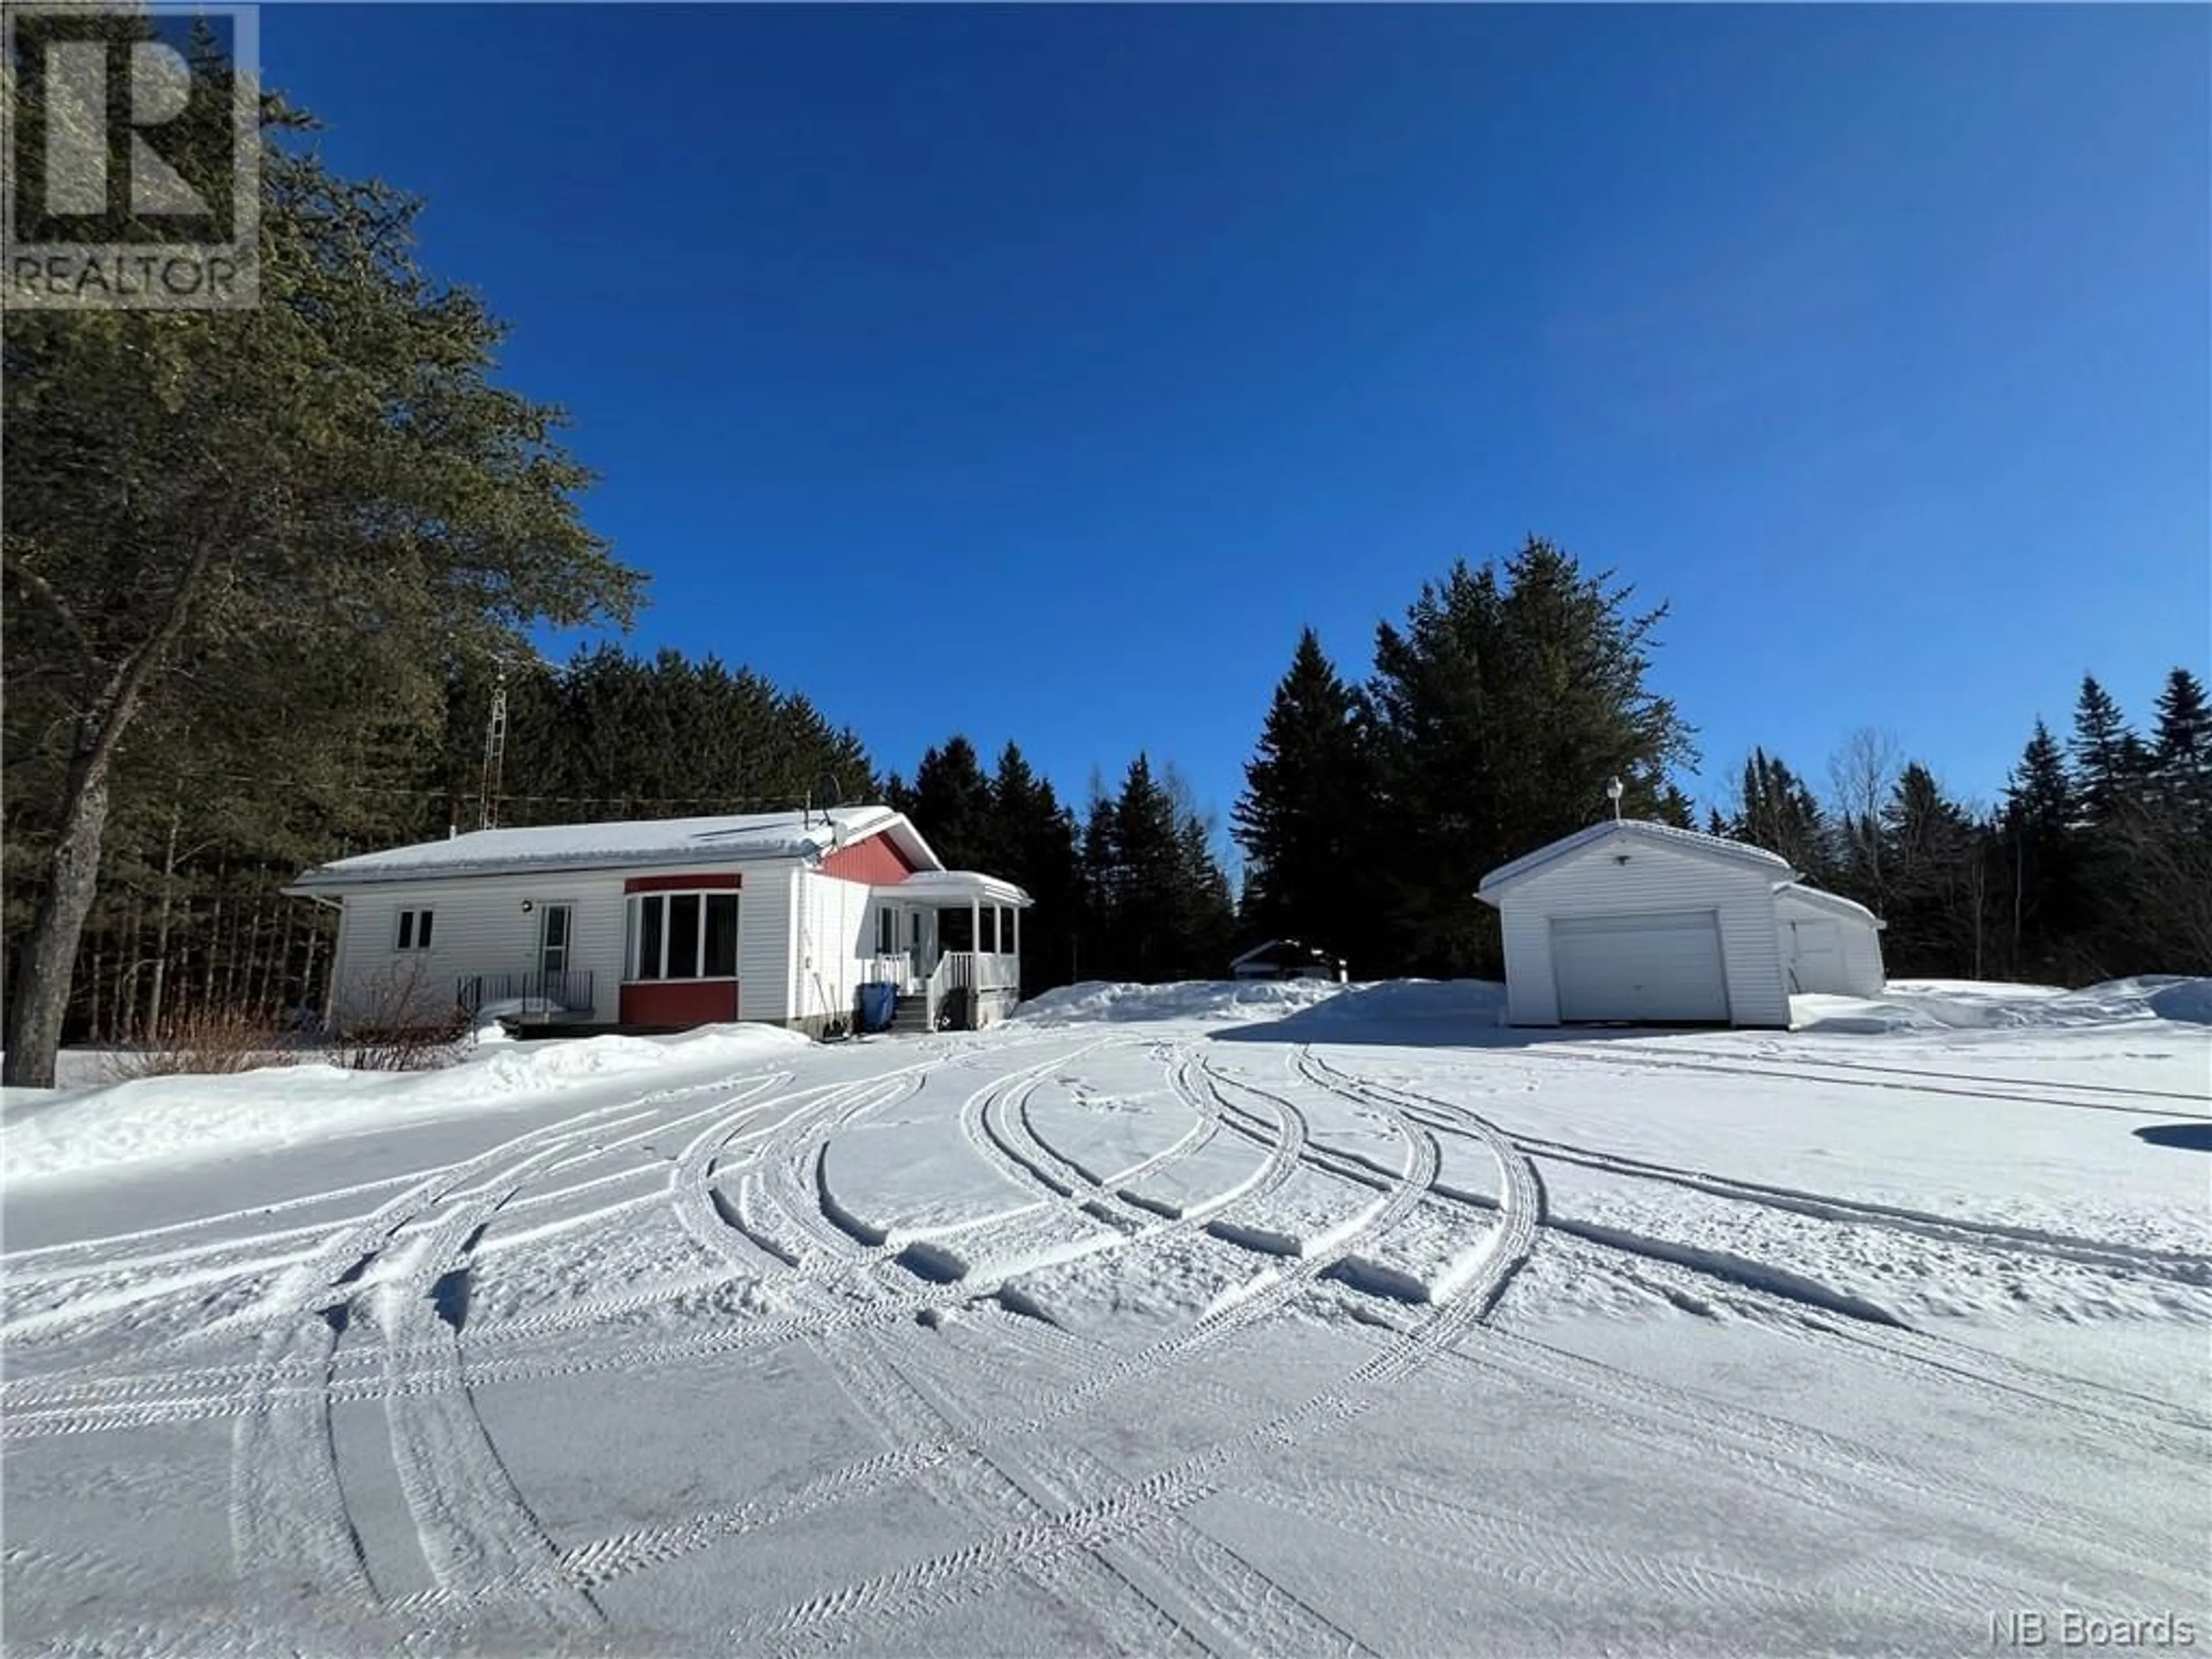 Home with unknown exterior material for 831 Trois Milles (Bird Lake) Road, Saint-Jacques New Brunswick E7B2H9